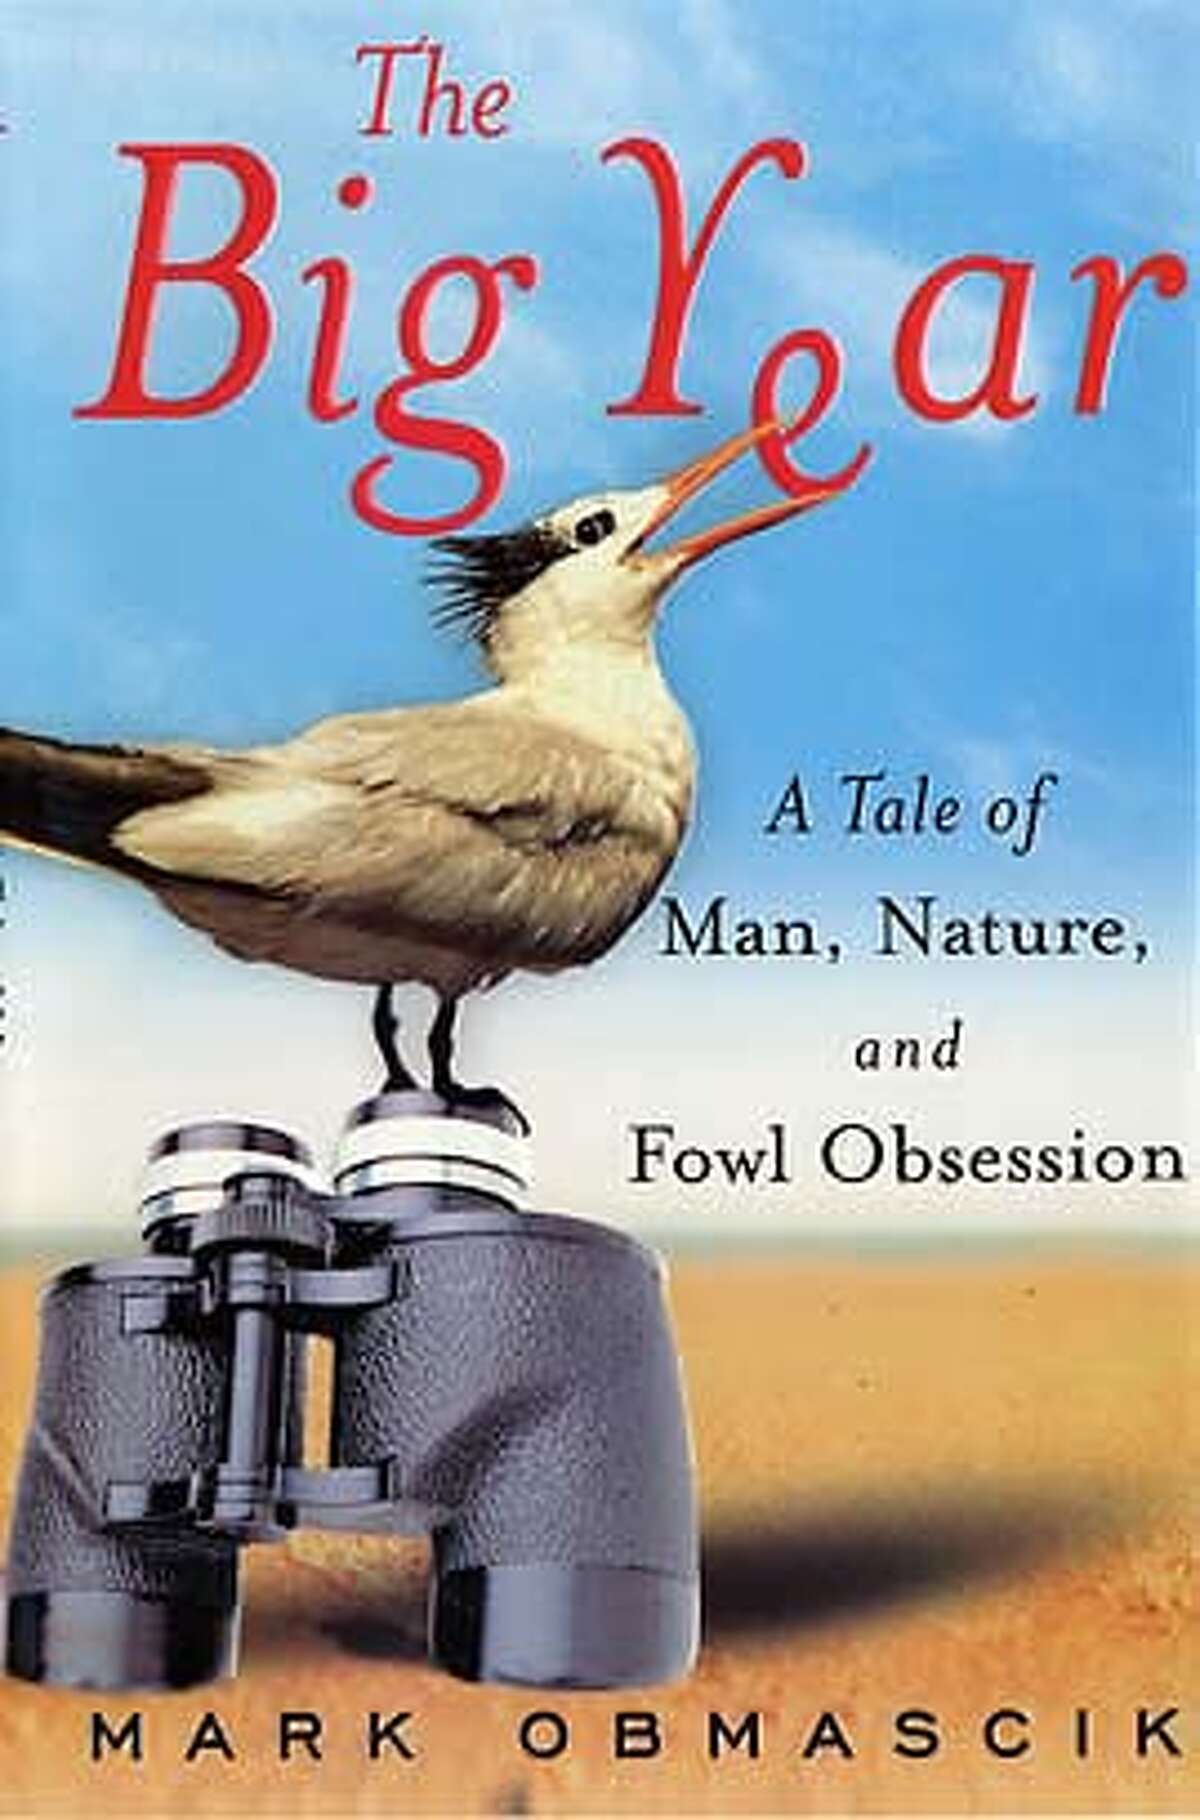 Book Jacket from "The Big Year" by Mark Obmascik (Free Press) to be used with book review only.